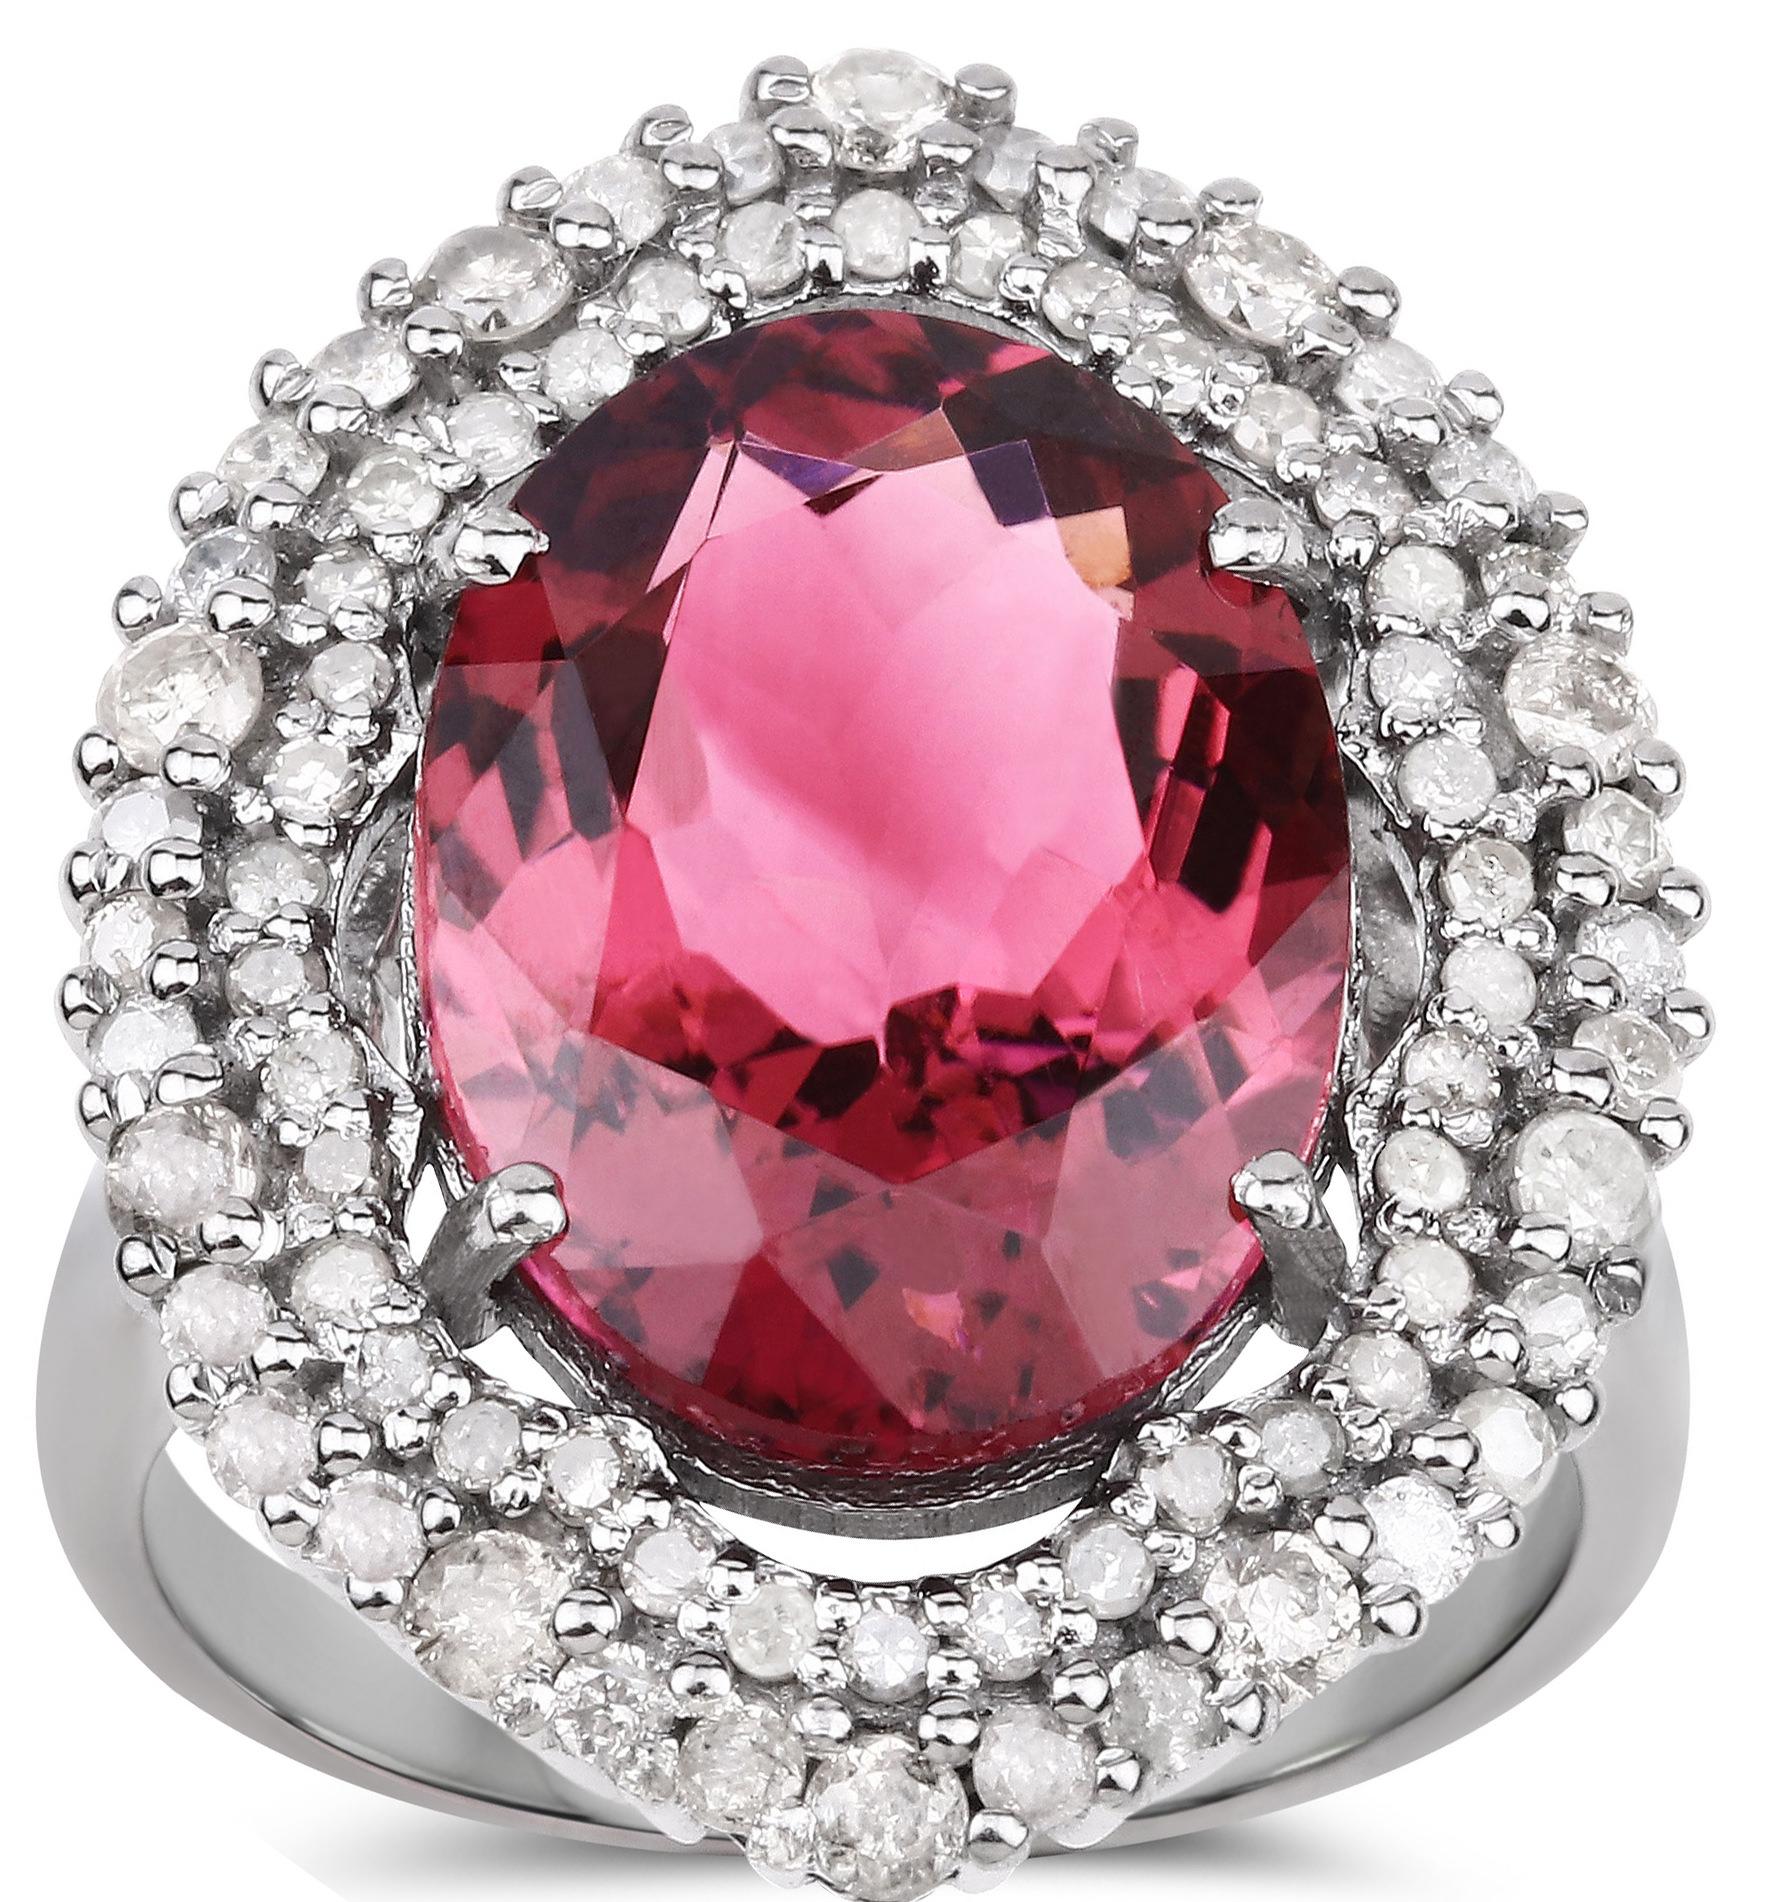 Contemporary Natural Pink Tourmaline Statement Ring With Diamonds 9 Carats Total For Sale